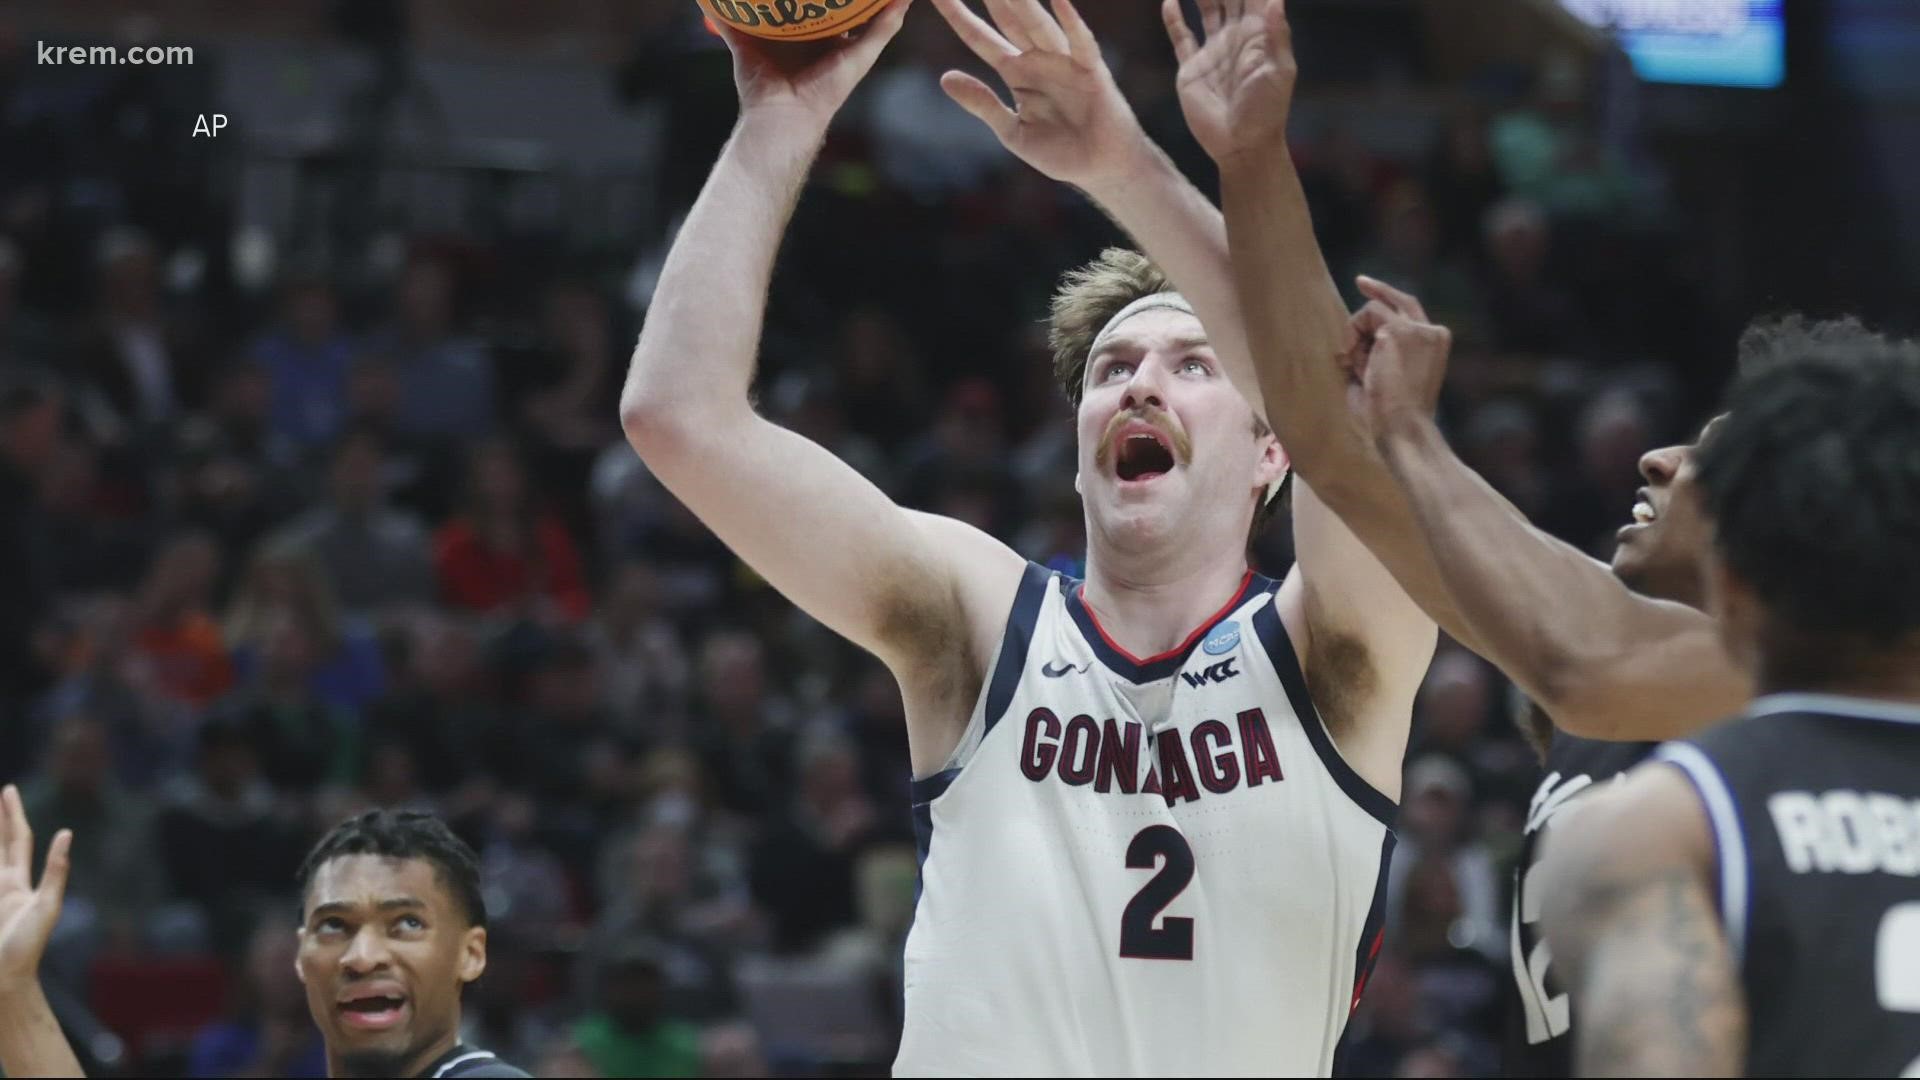 Gonzaga overcame a rough first half to beat Georgia State in the first round of the NCAA Tournament.